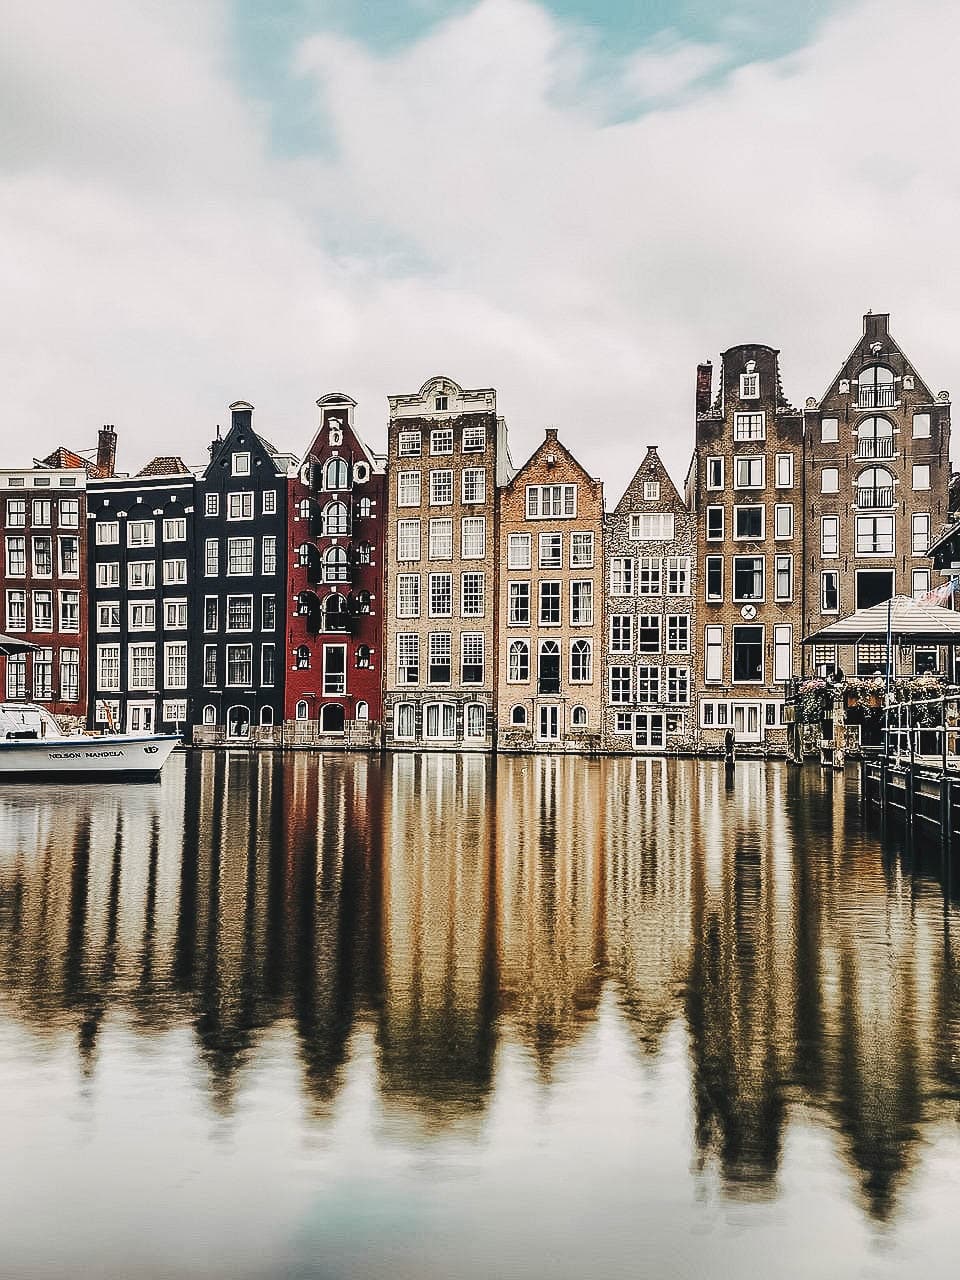 What to do in 4 days in Amsterdam